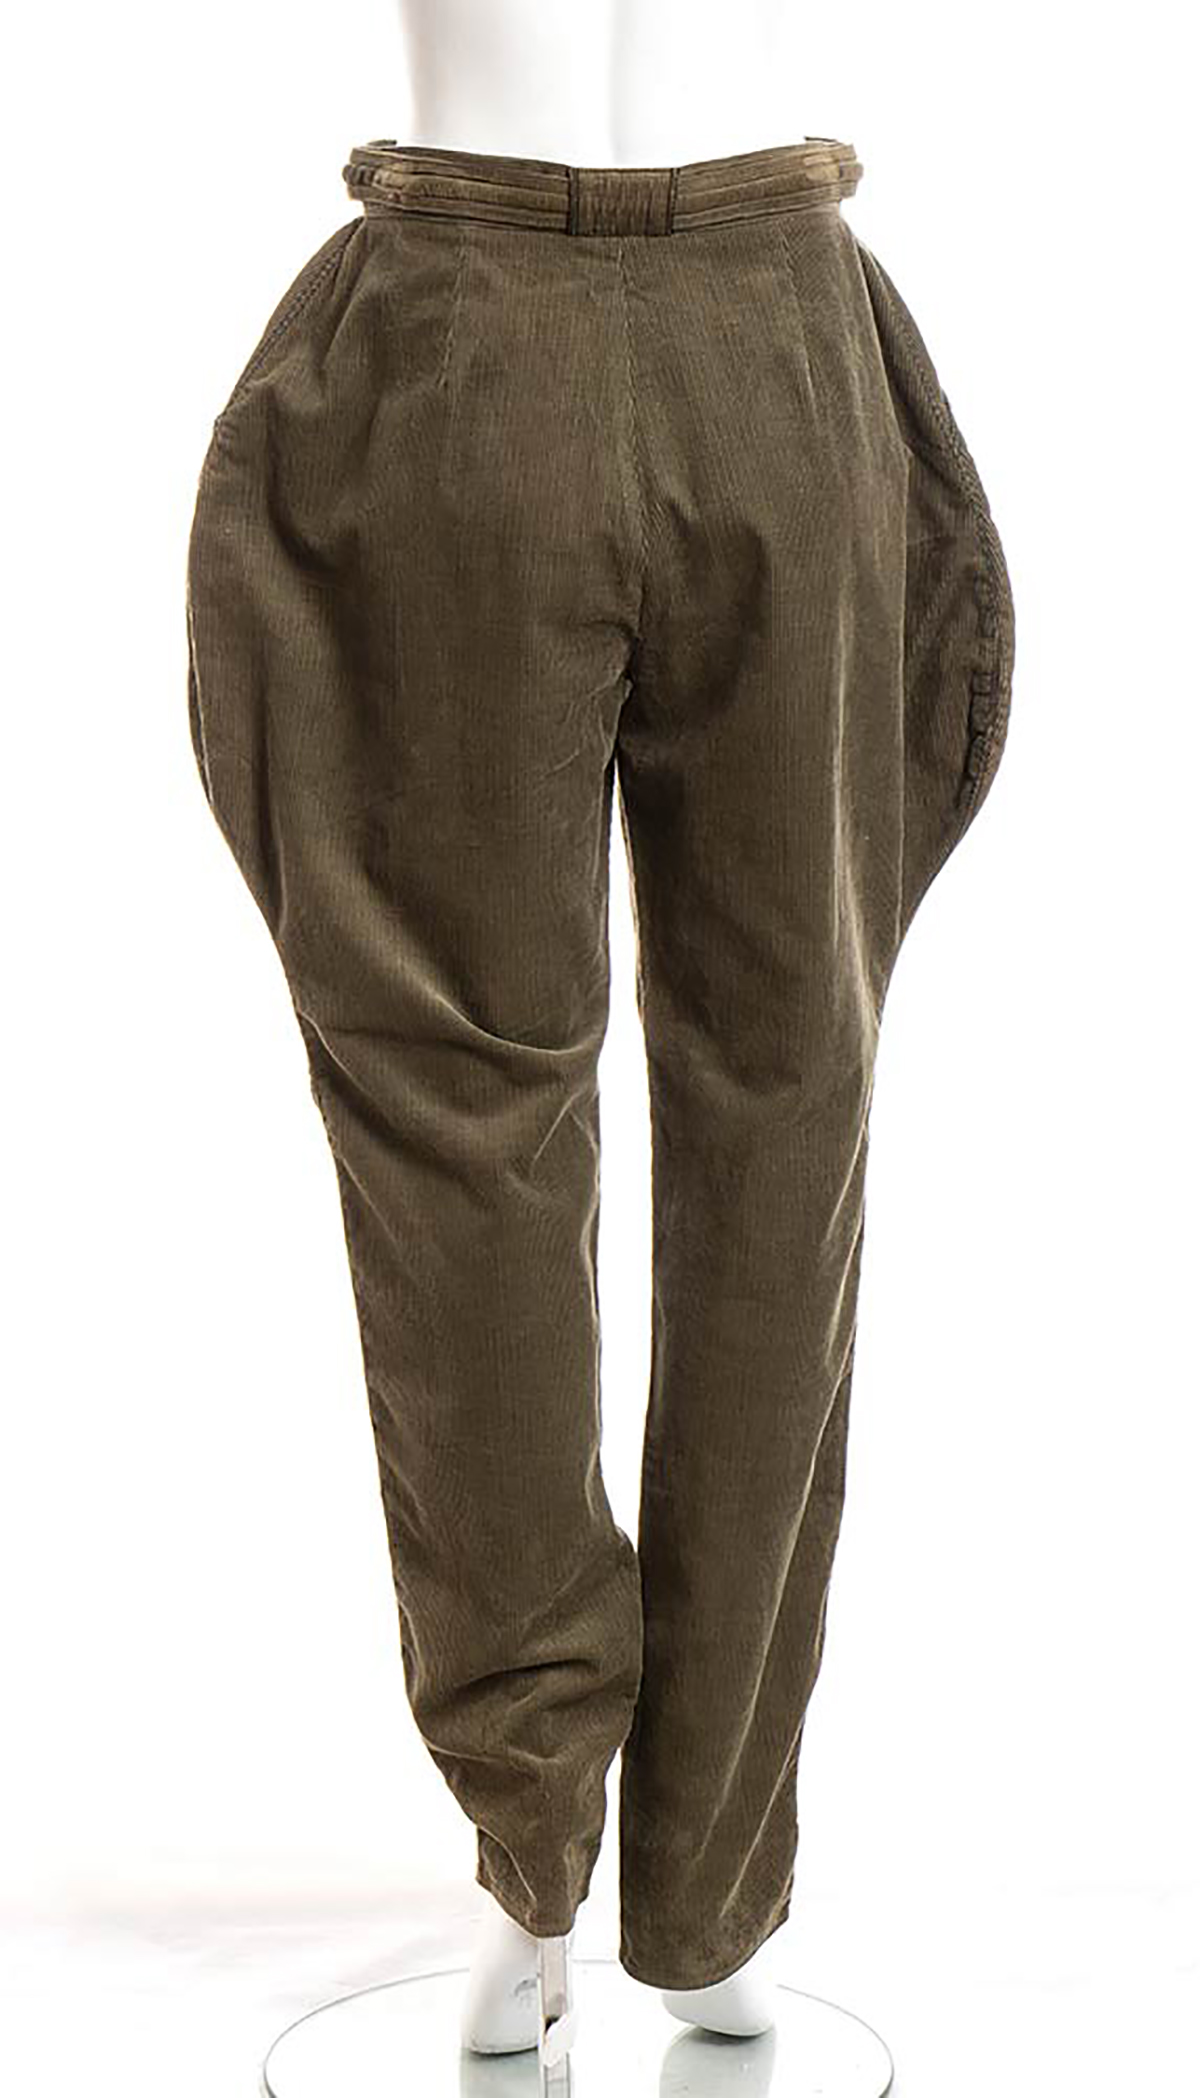 GIANNI VERSACE COTTON TROUSER 1981 ca Cotton corduroy dove gray trouser, side embroidery. General - Image 3 of 5